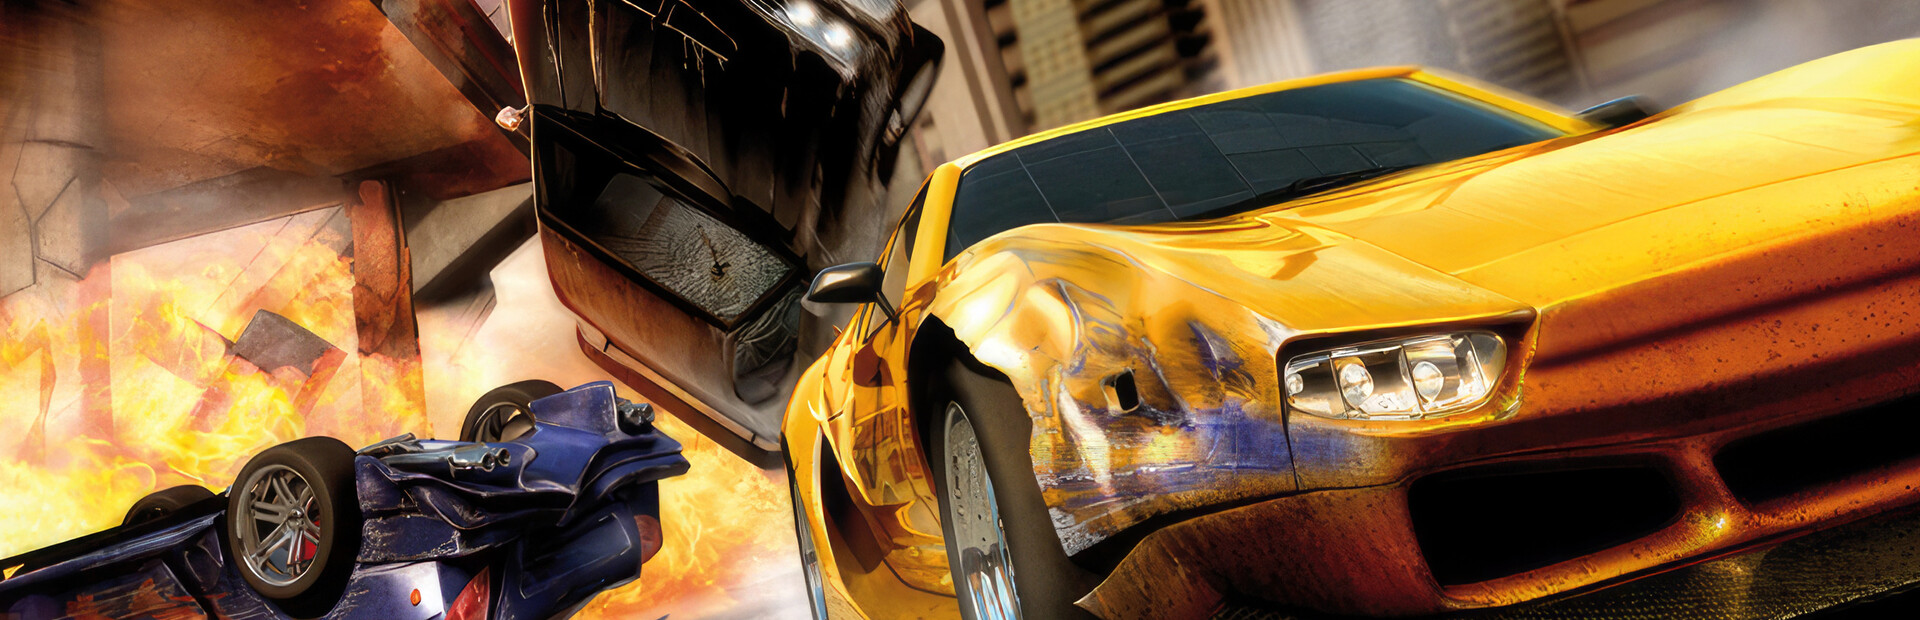 FlatOut: Ultimate Carnage cover image